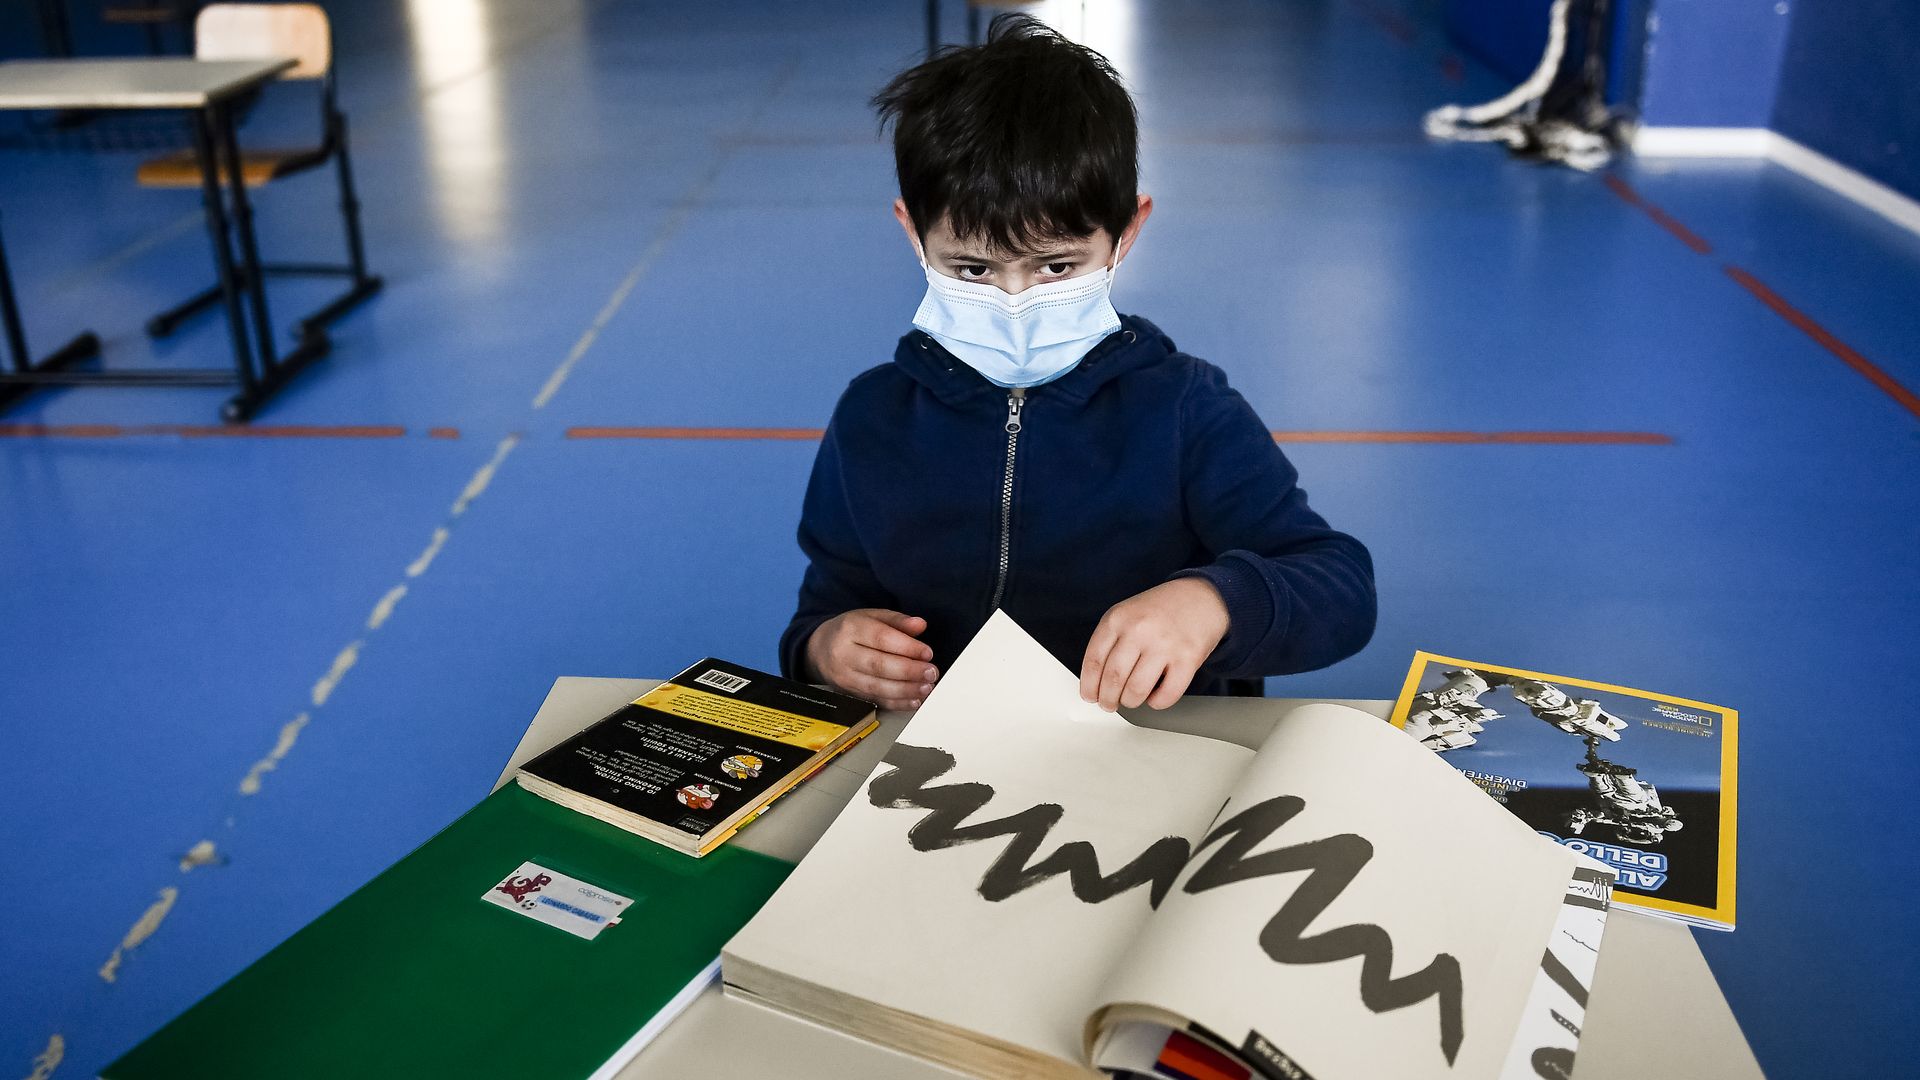 In this image, a young boy wears a face mask and flips through an art book